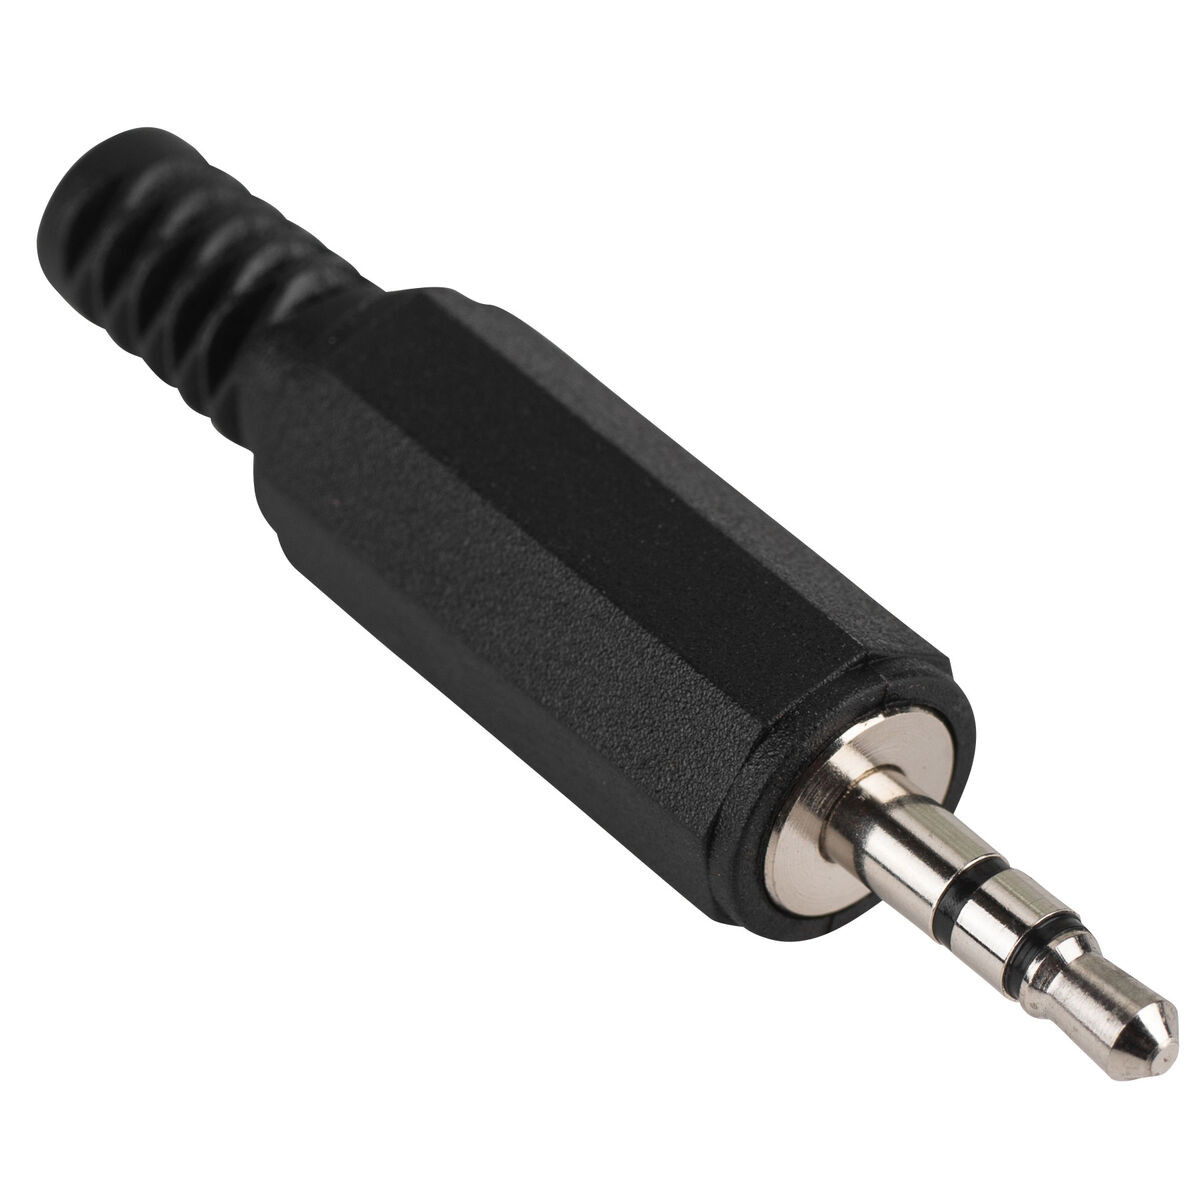 3.5mm Stereo Plug with Strain Relief (PL-853)